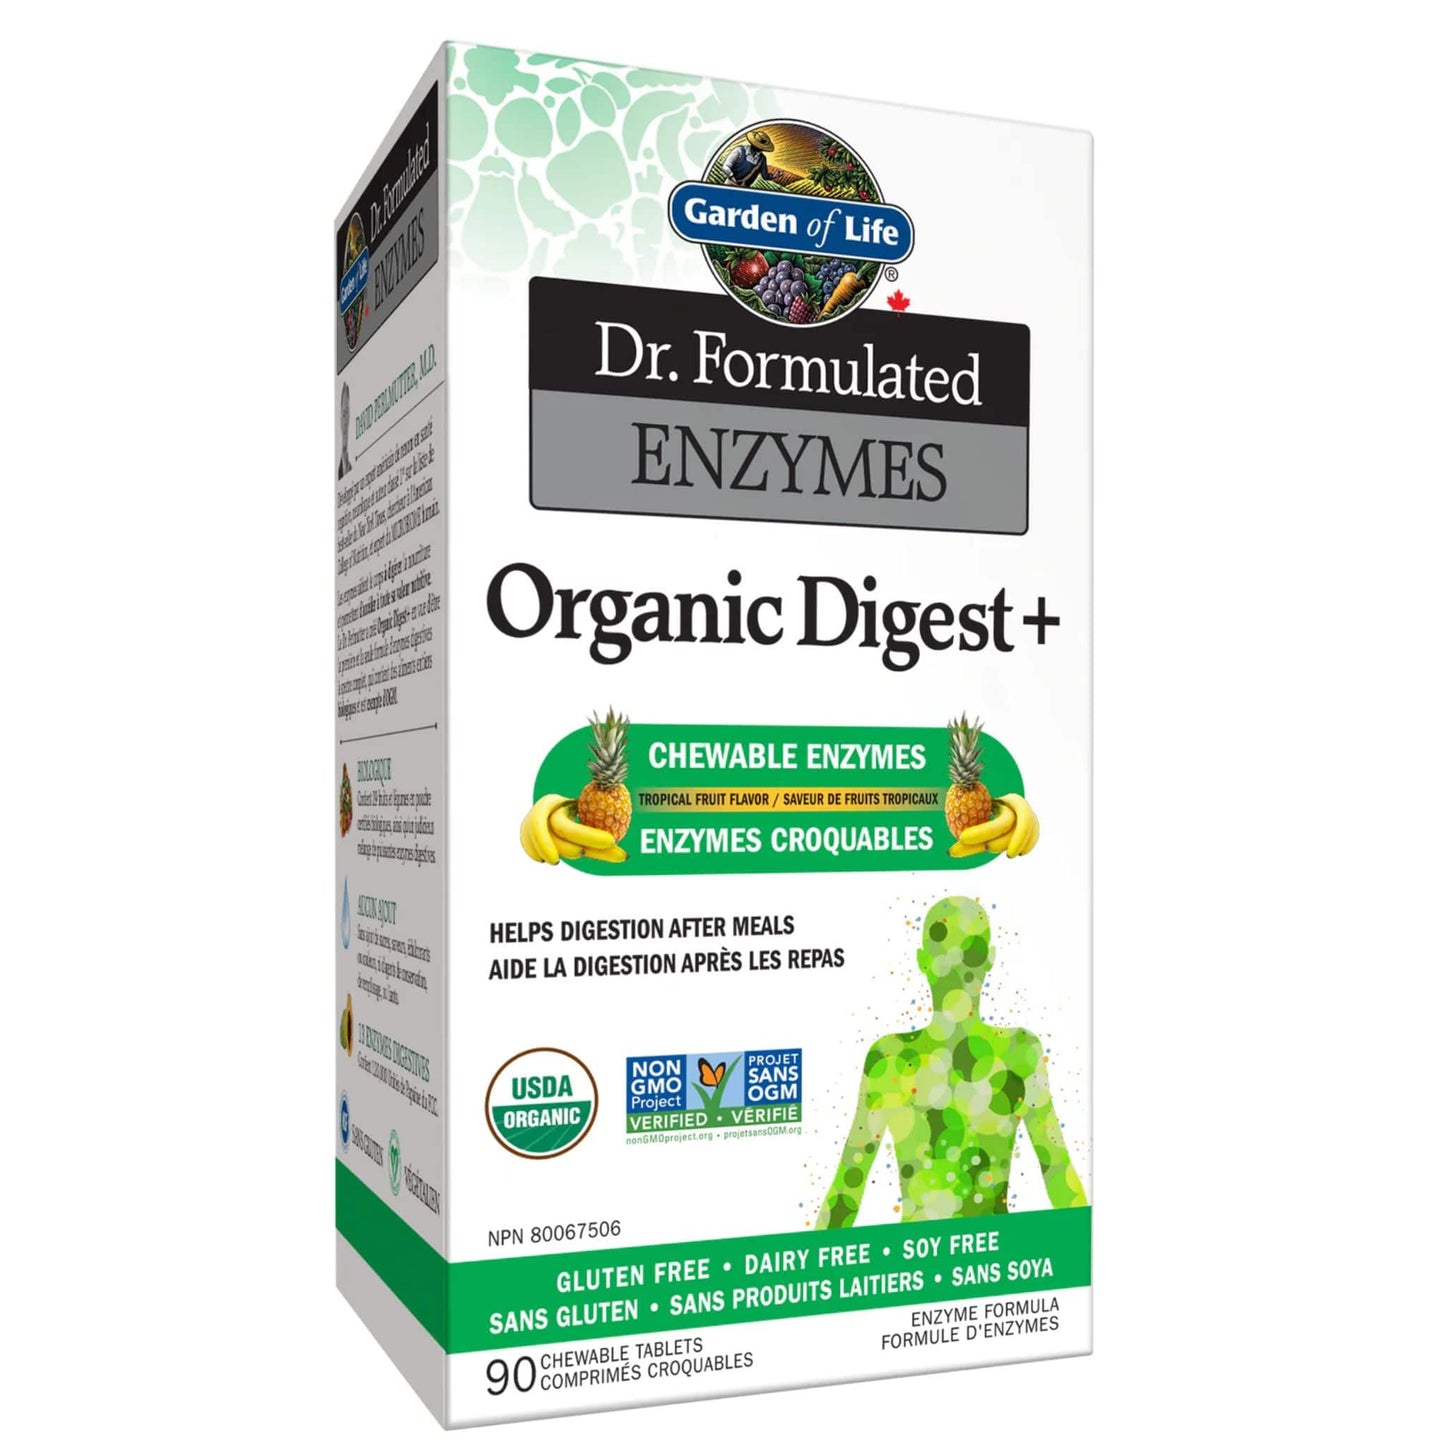 Garden of Life Dr. Formulated Enzymes Organic Digest+, 90 Chewable Tablets